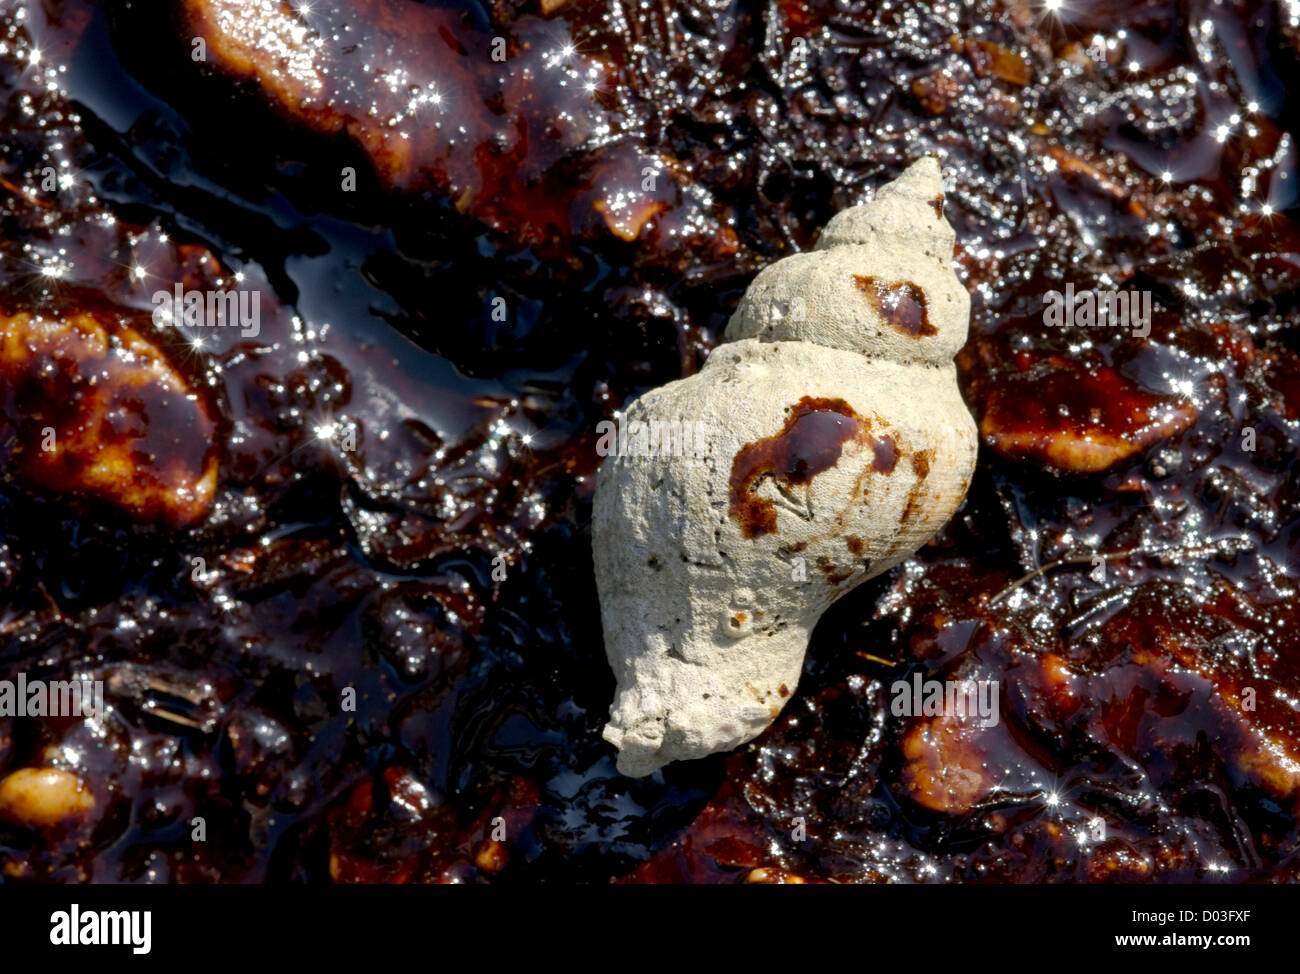 Nov. 15, 2012 - BP has agreed to plead guilty to felony charges and pay $4.5 billion in penalties for the Deepwater Horizon oil-rig accident and spill. PICTURED:  June 11, 2010 - Grand Isle, Louisiana, U.S. - A shell sits on oil stained rocks from the Deepwater Horizon oil spill in Grand Isle. Oil from the massive spill continues to impact the Gulf of Mexico. (Credit Image: © Robin Loznak/ZUMApress.com) Stock Photo